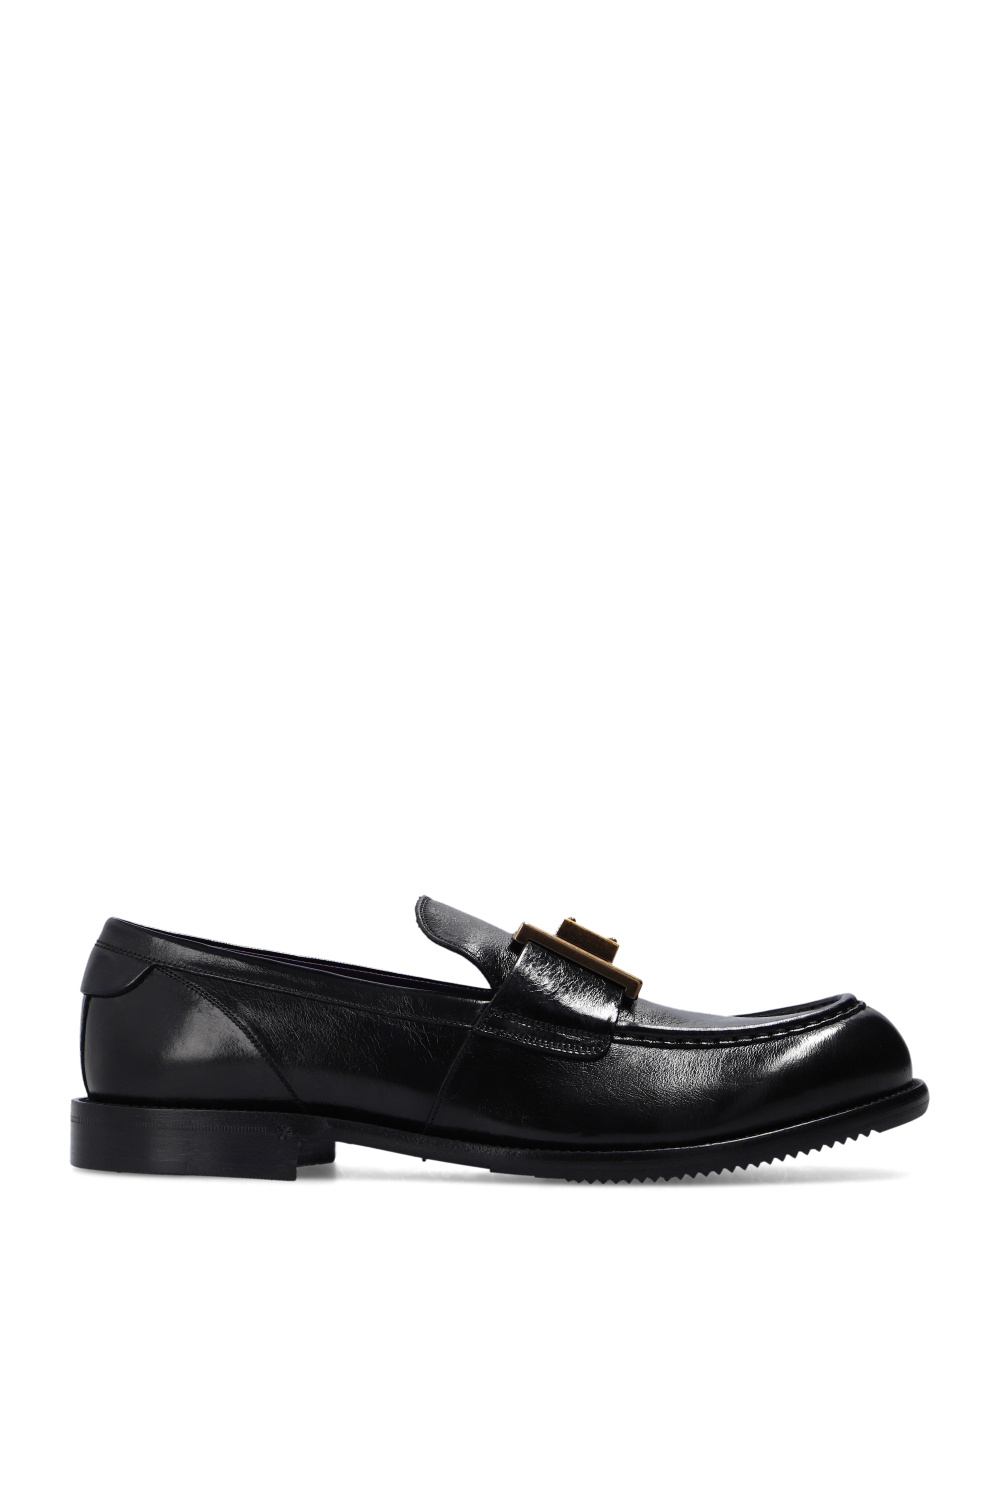 Dolce & Gabbana's Latest Are Fit for a King Leather loafers